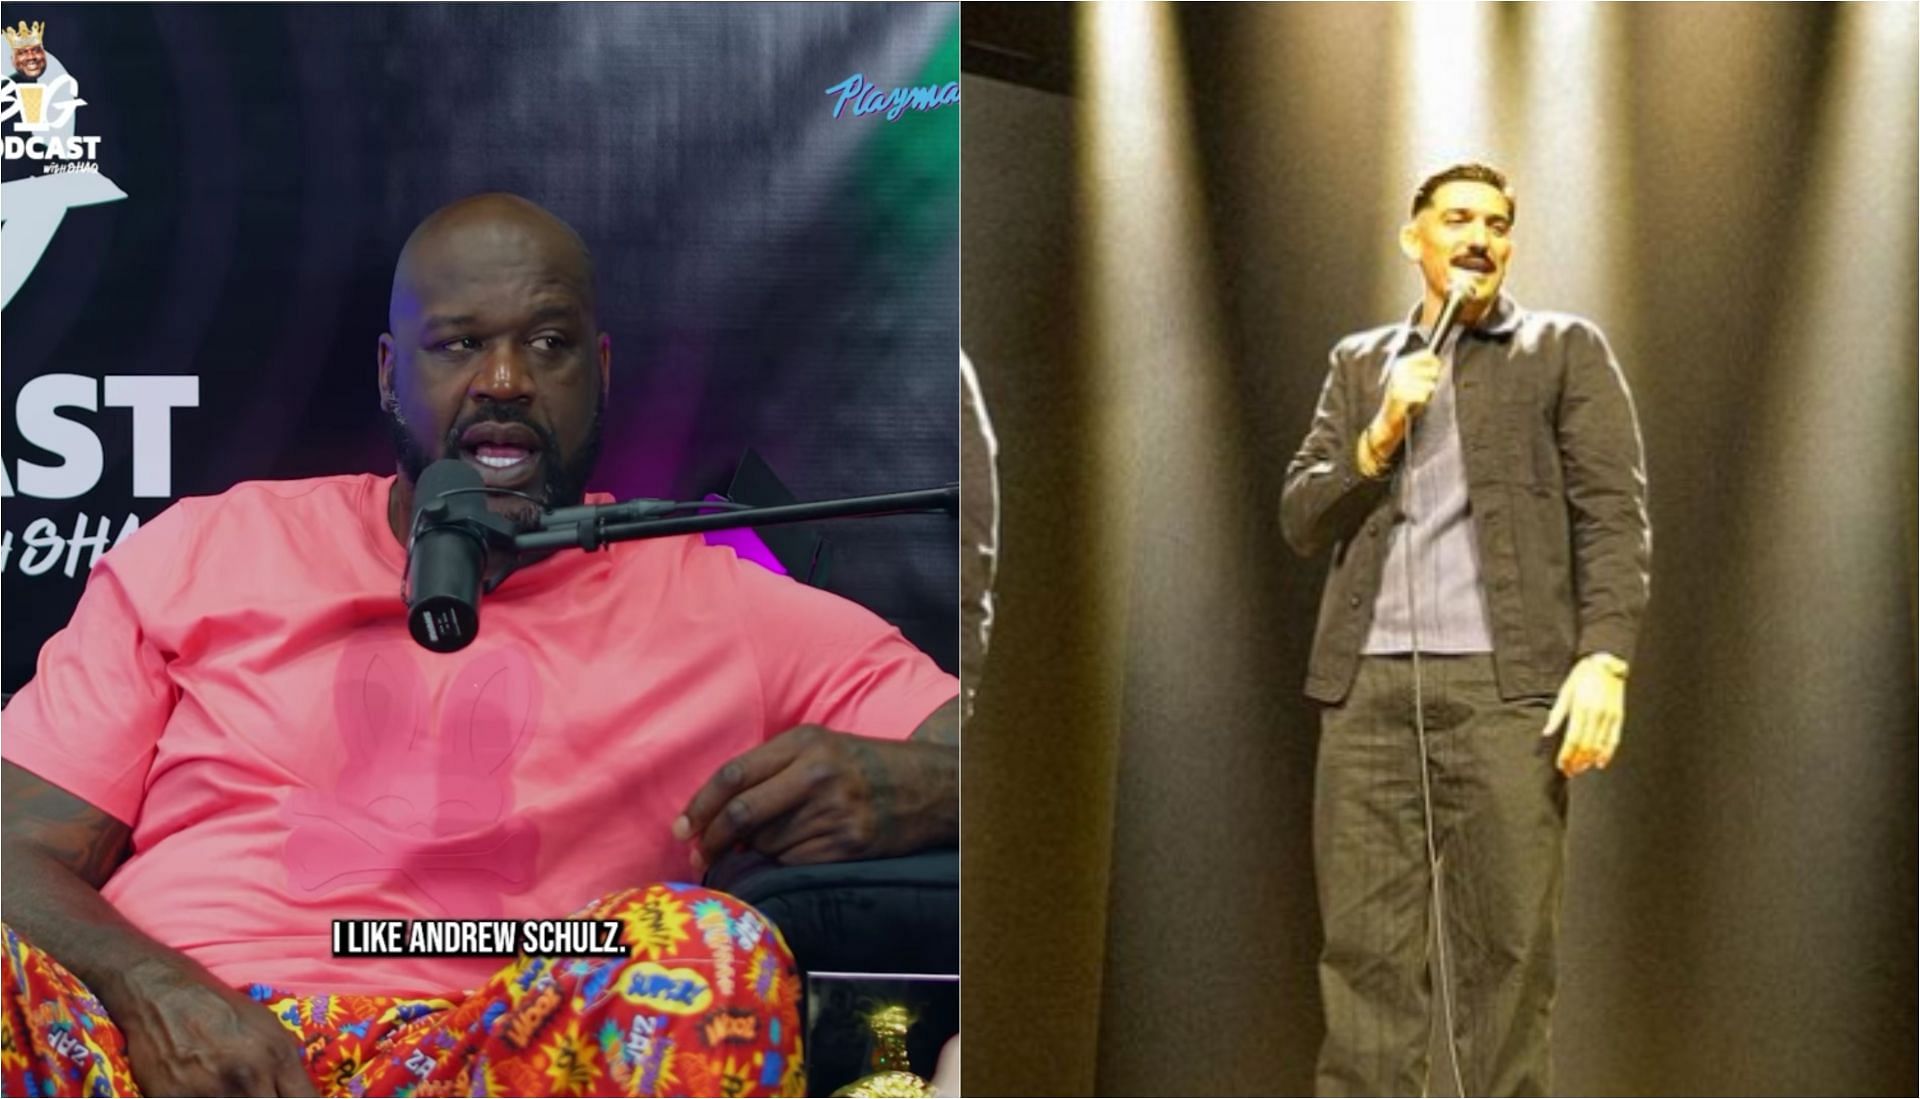 Andrew Schulz playfully trolls Shaquille O